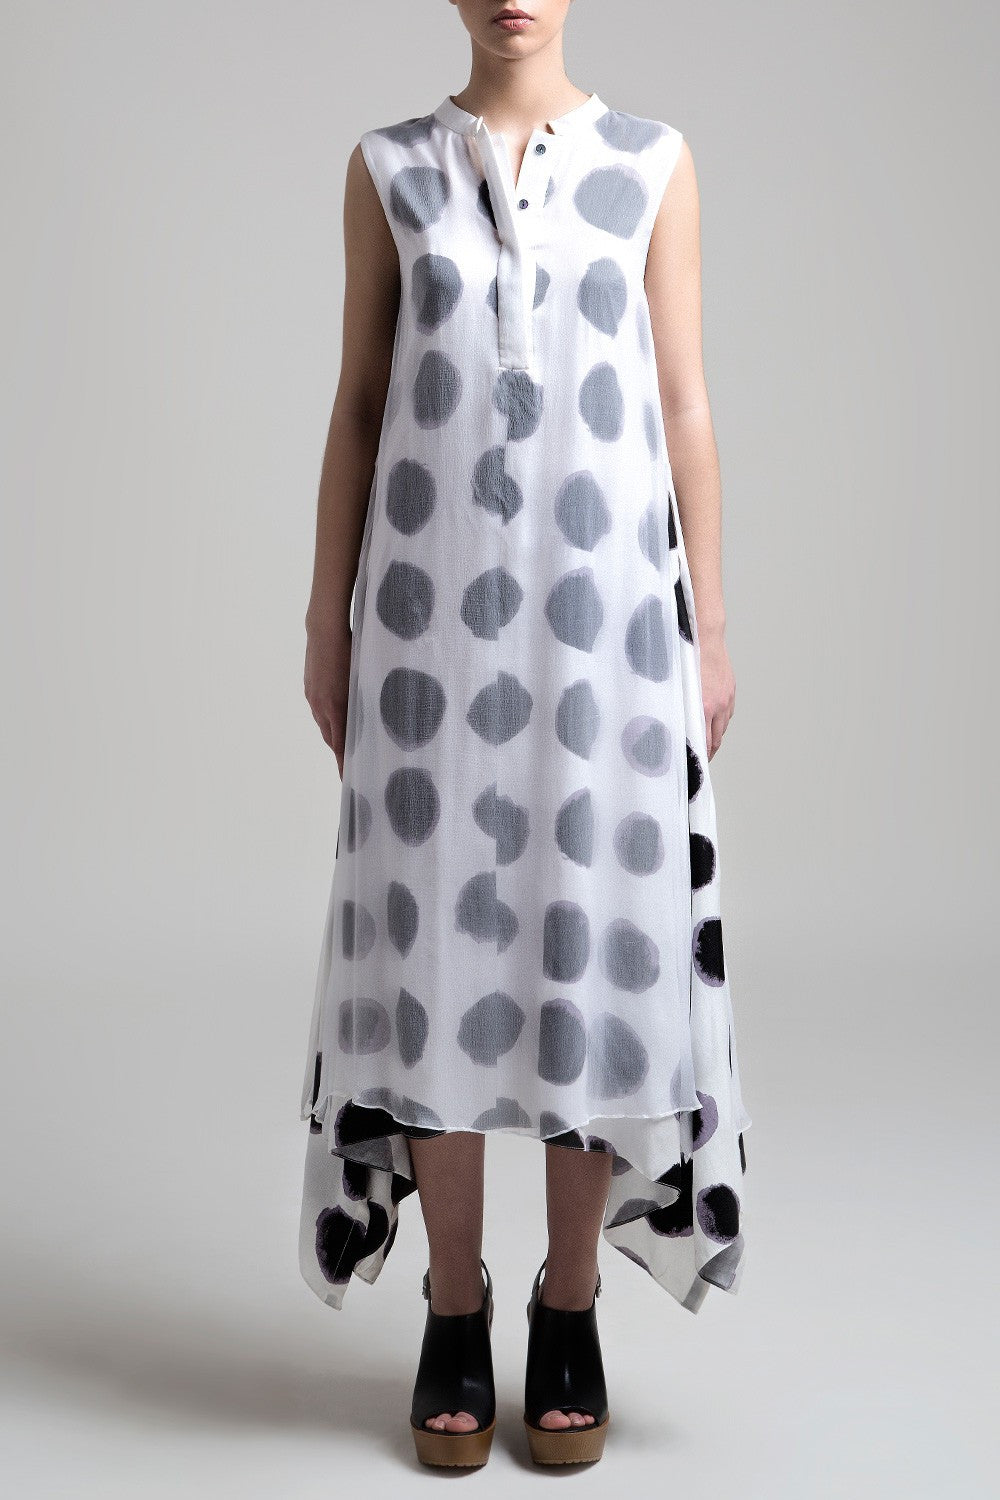 White Color Polka Dot Tunic Dress From Bench